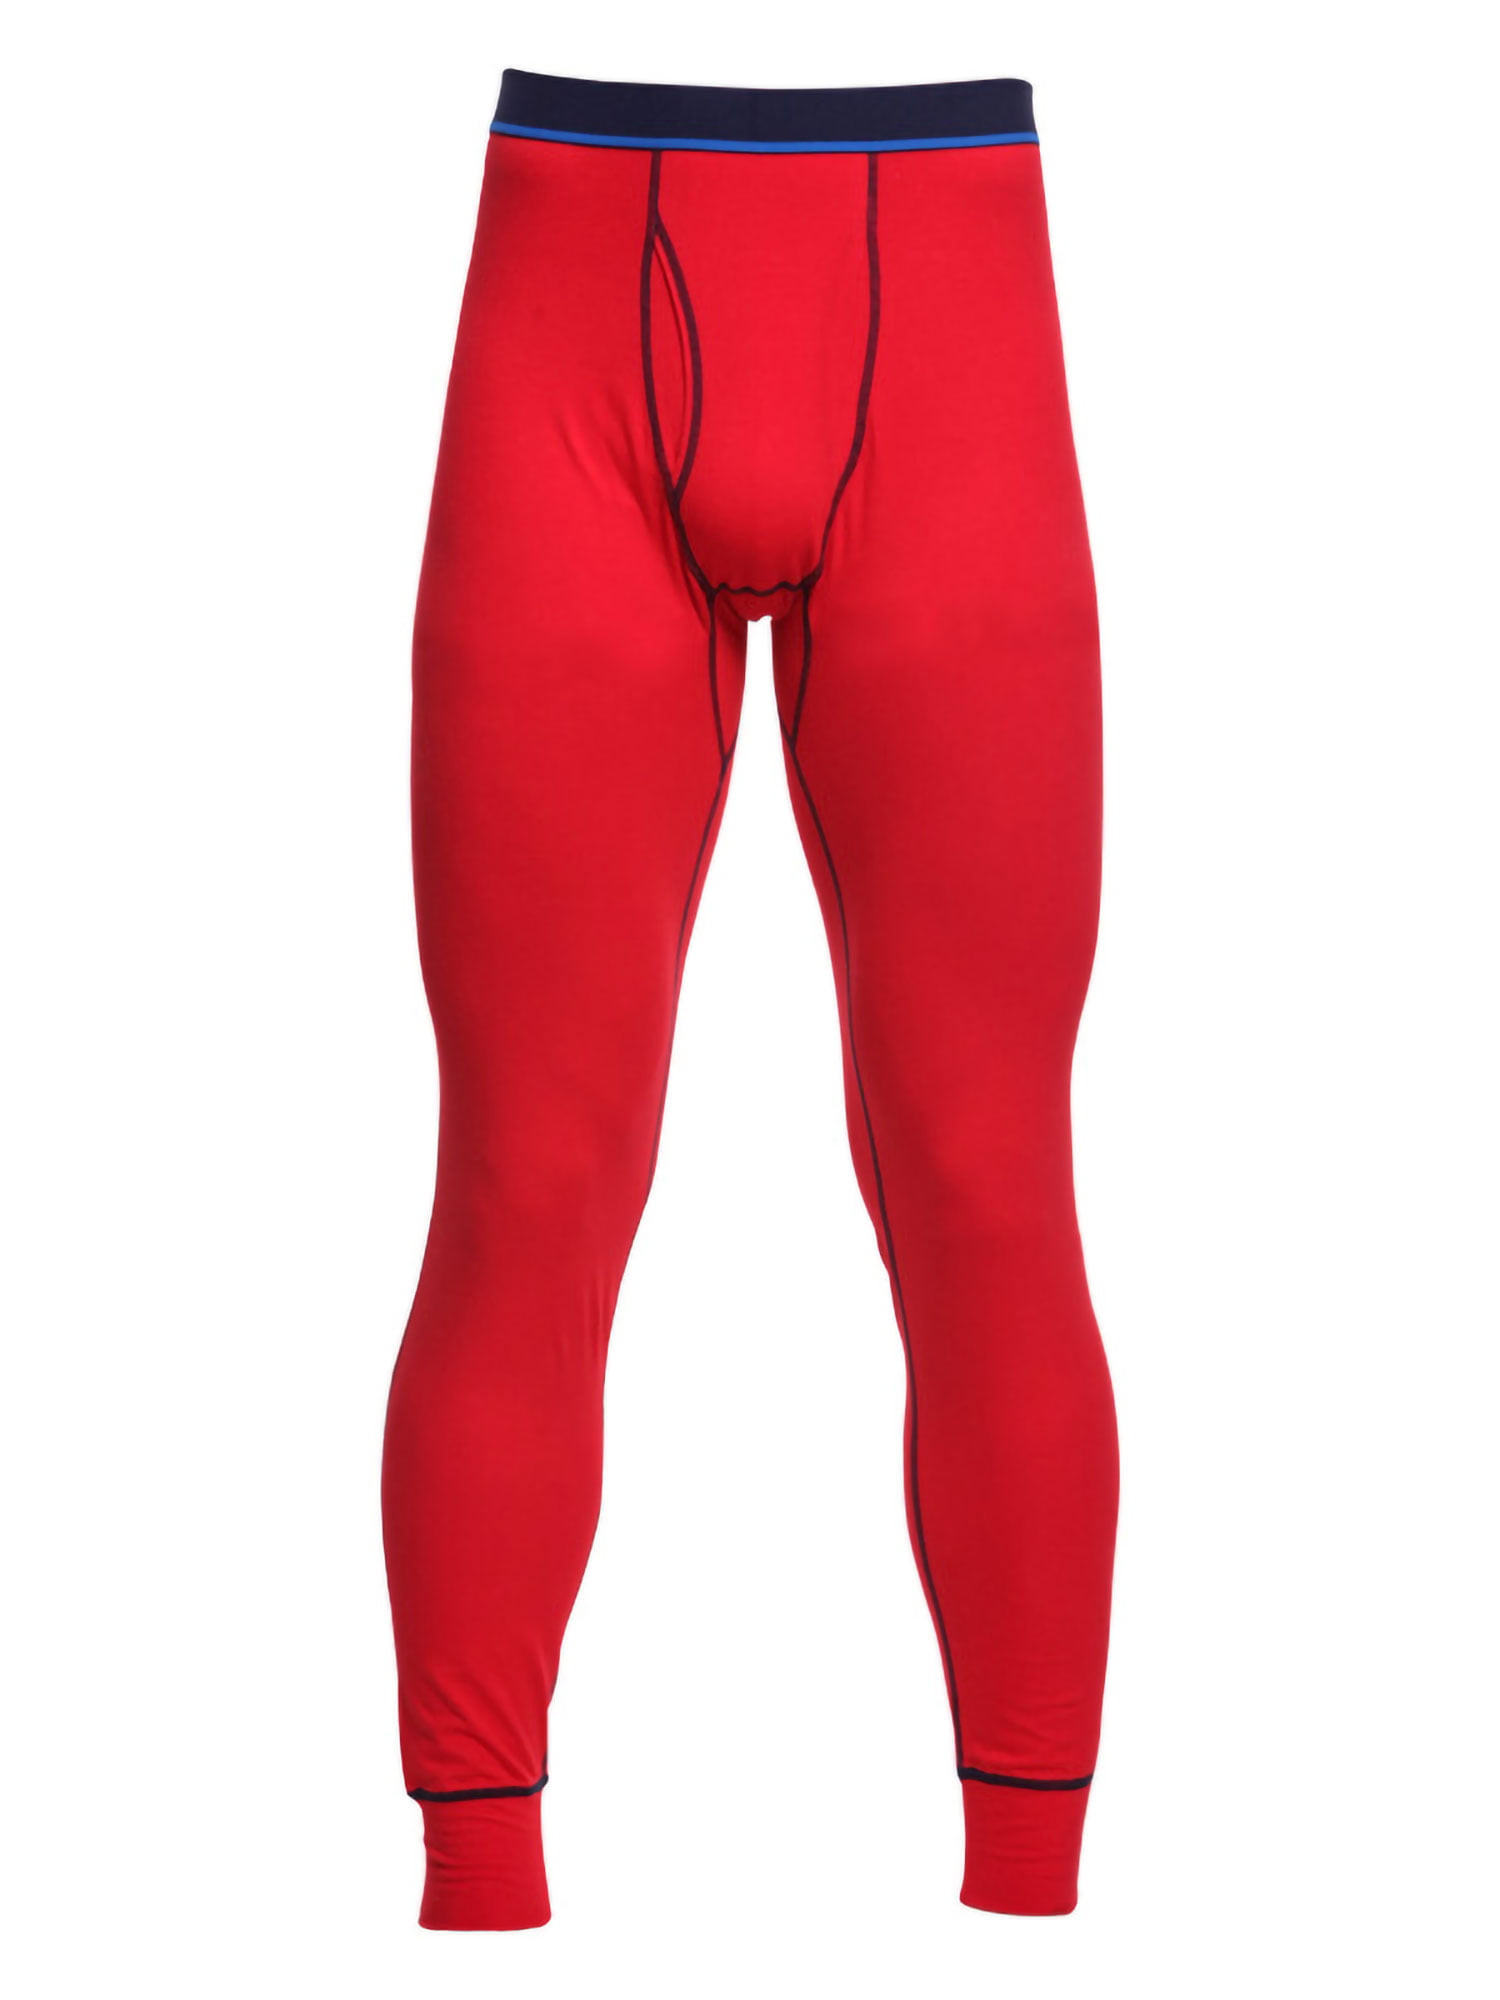 Fdx Thermolinx Red Men's Base Layer Thermal Winter Compression Top, XXL / Red